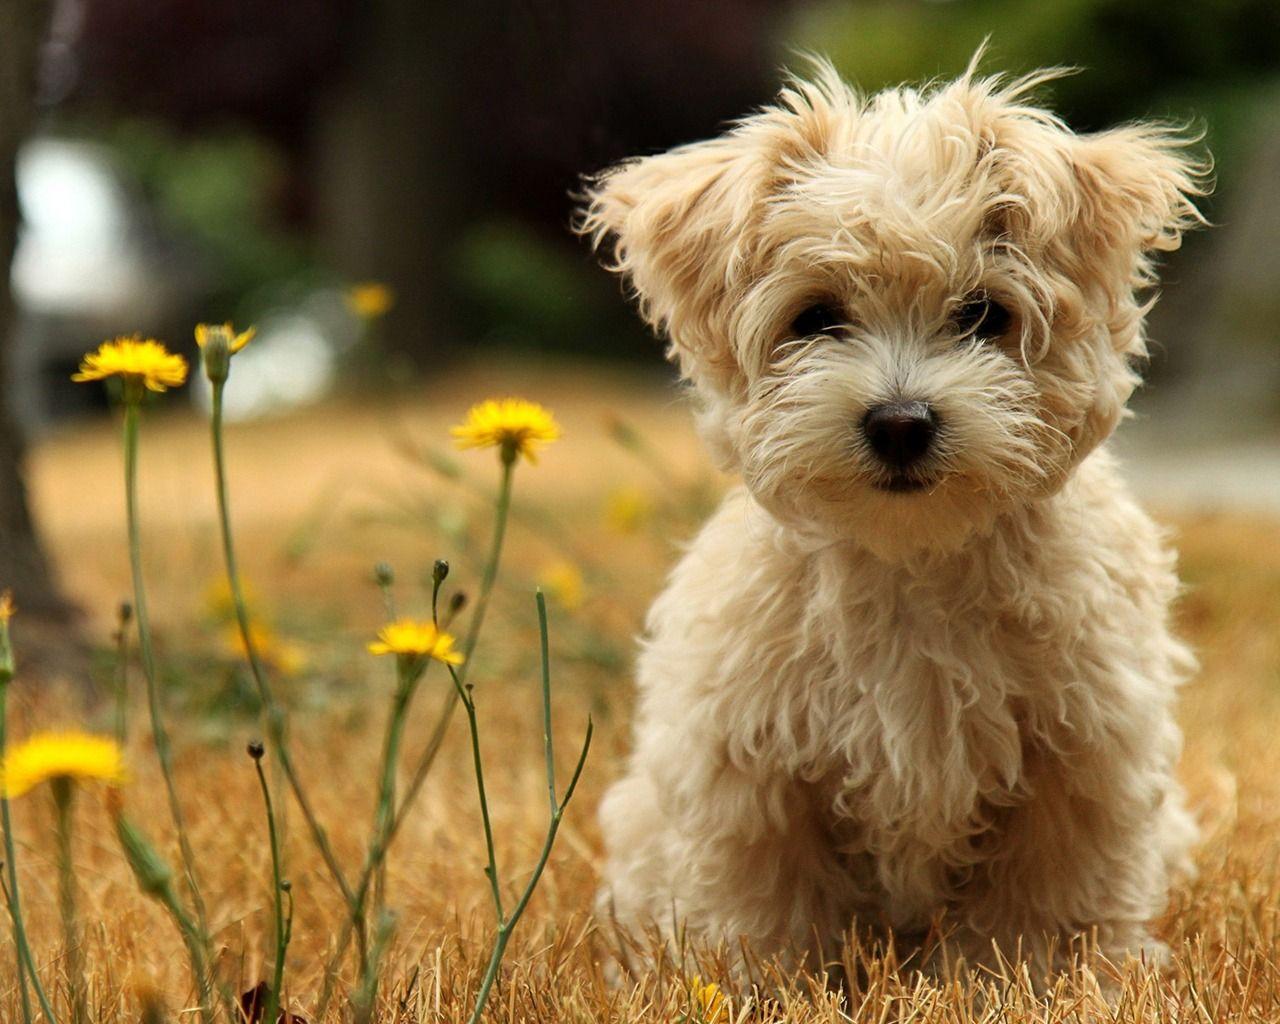 Puppy Wallpaper, 34 Puppy Android Compatible Photo, atgbcentral.com